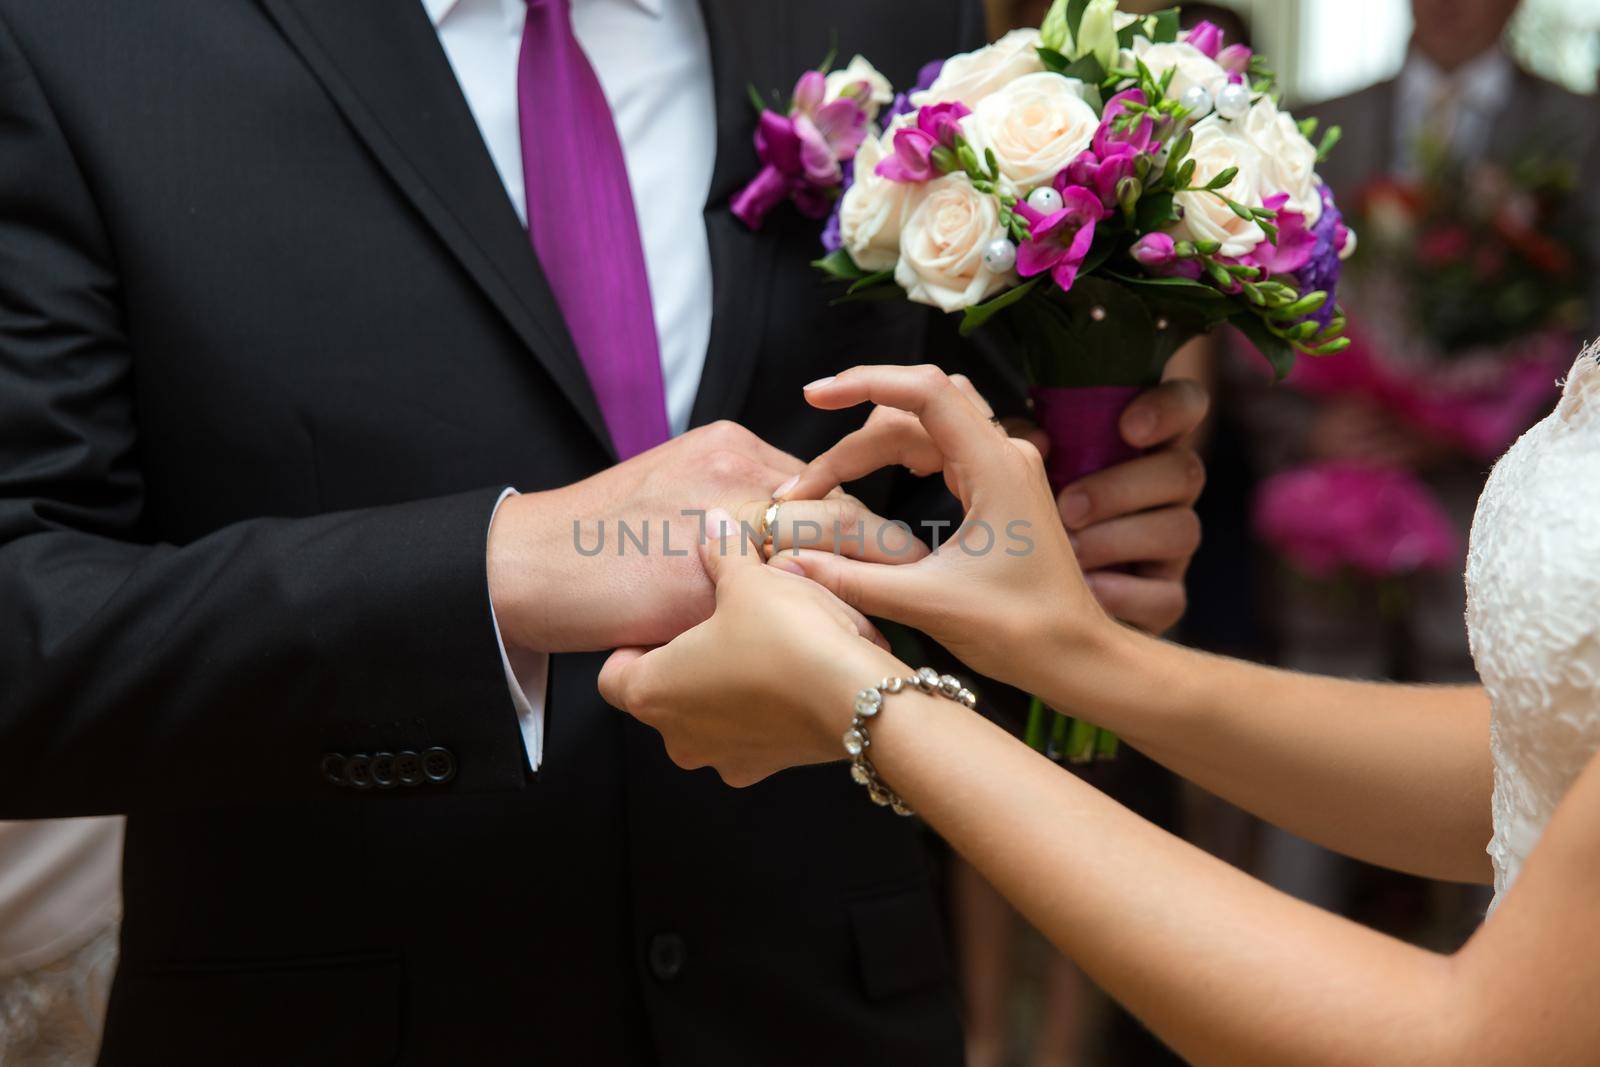 Bride putting a ring on groom's finger by BY-_-BY